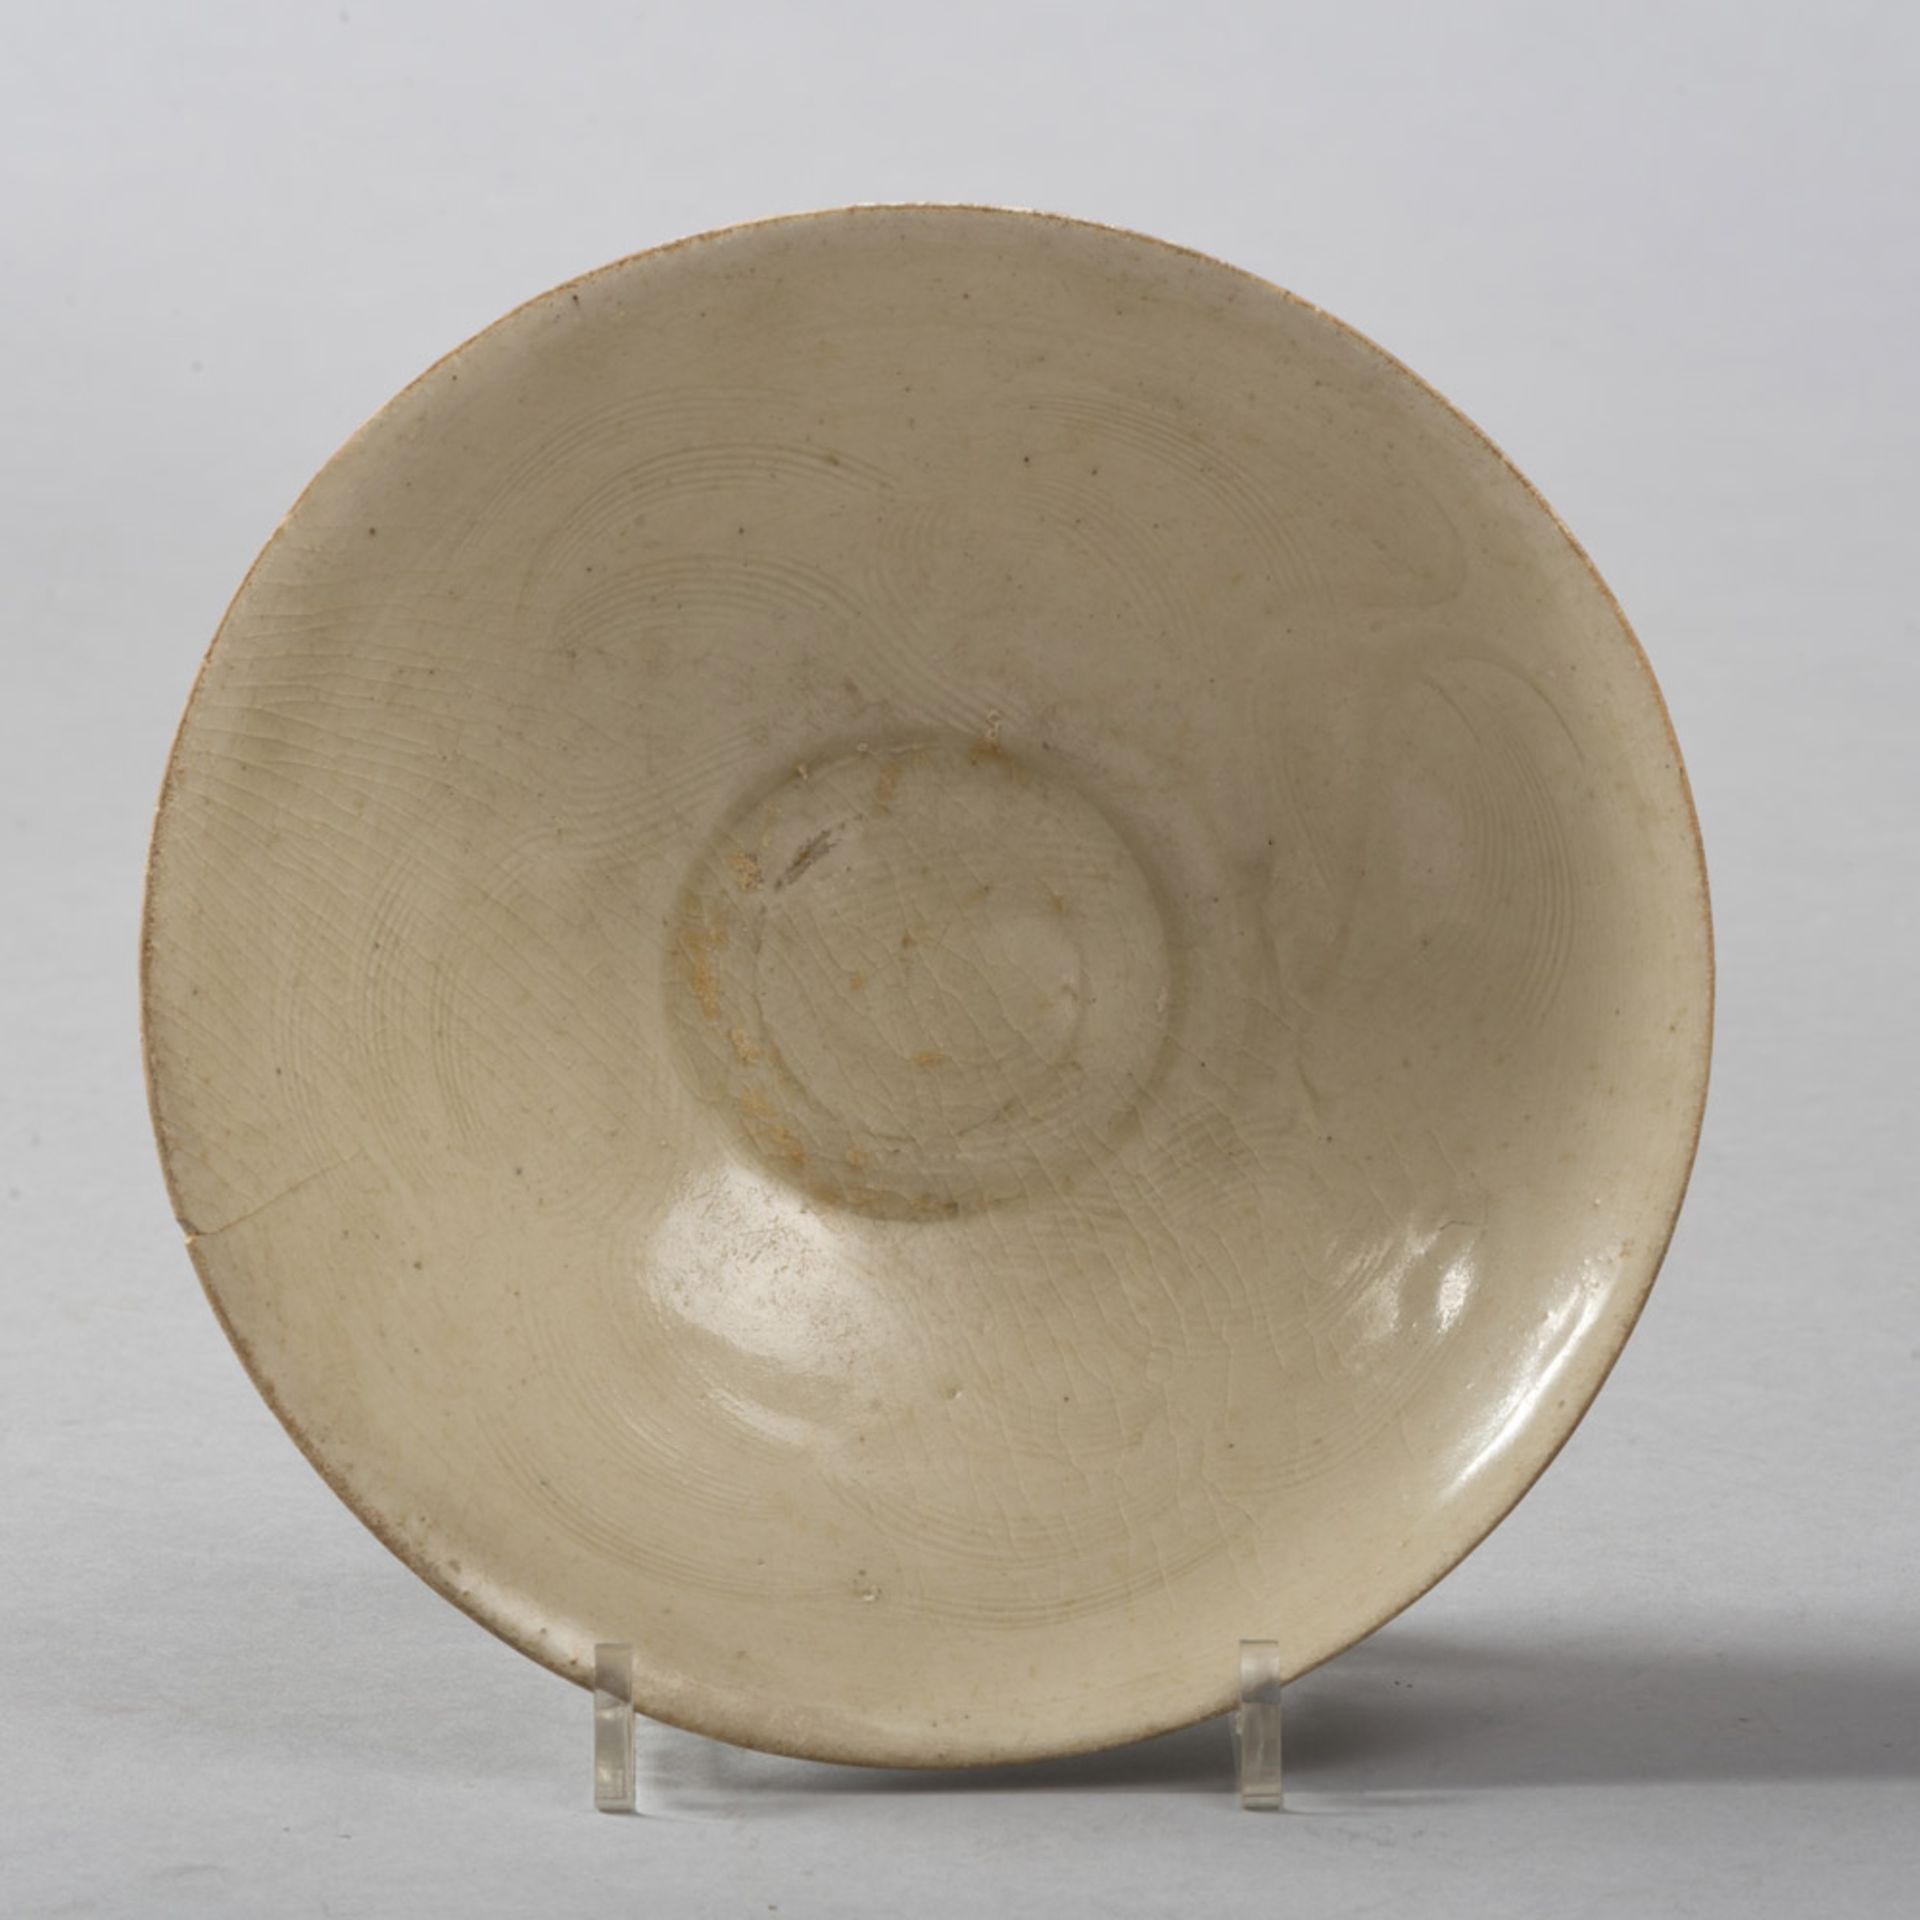 A CHINESE GLAZED STONEWARE BOWL. 12TH-14TH CENTURY